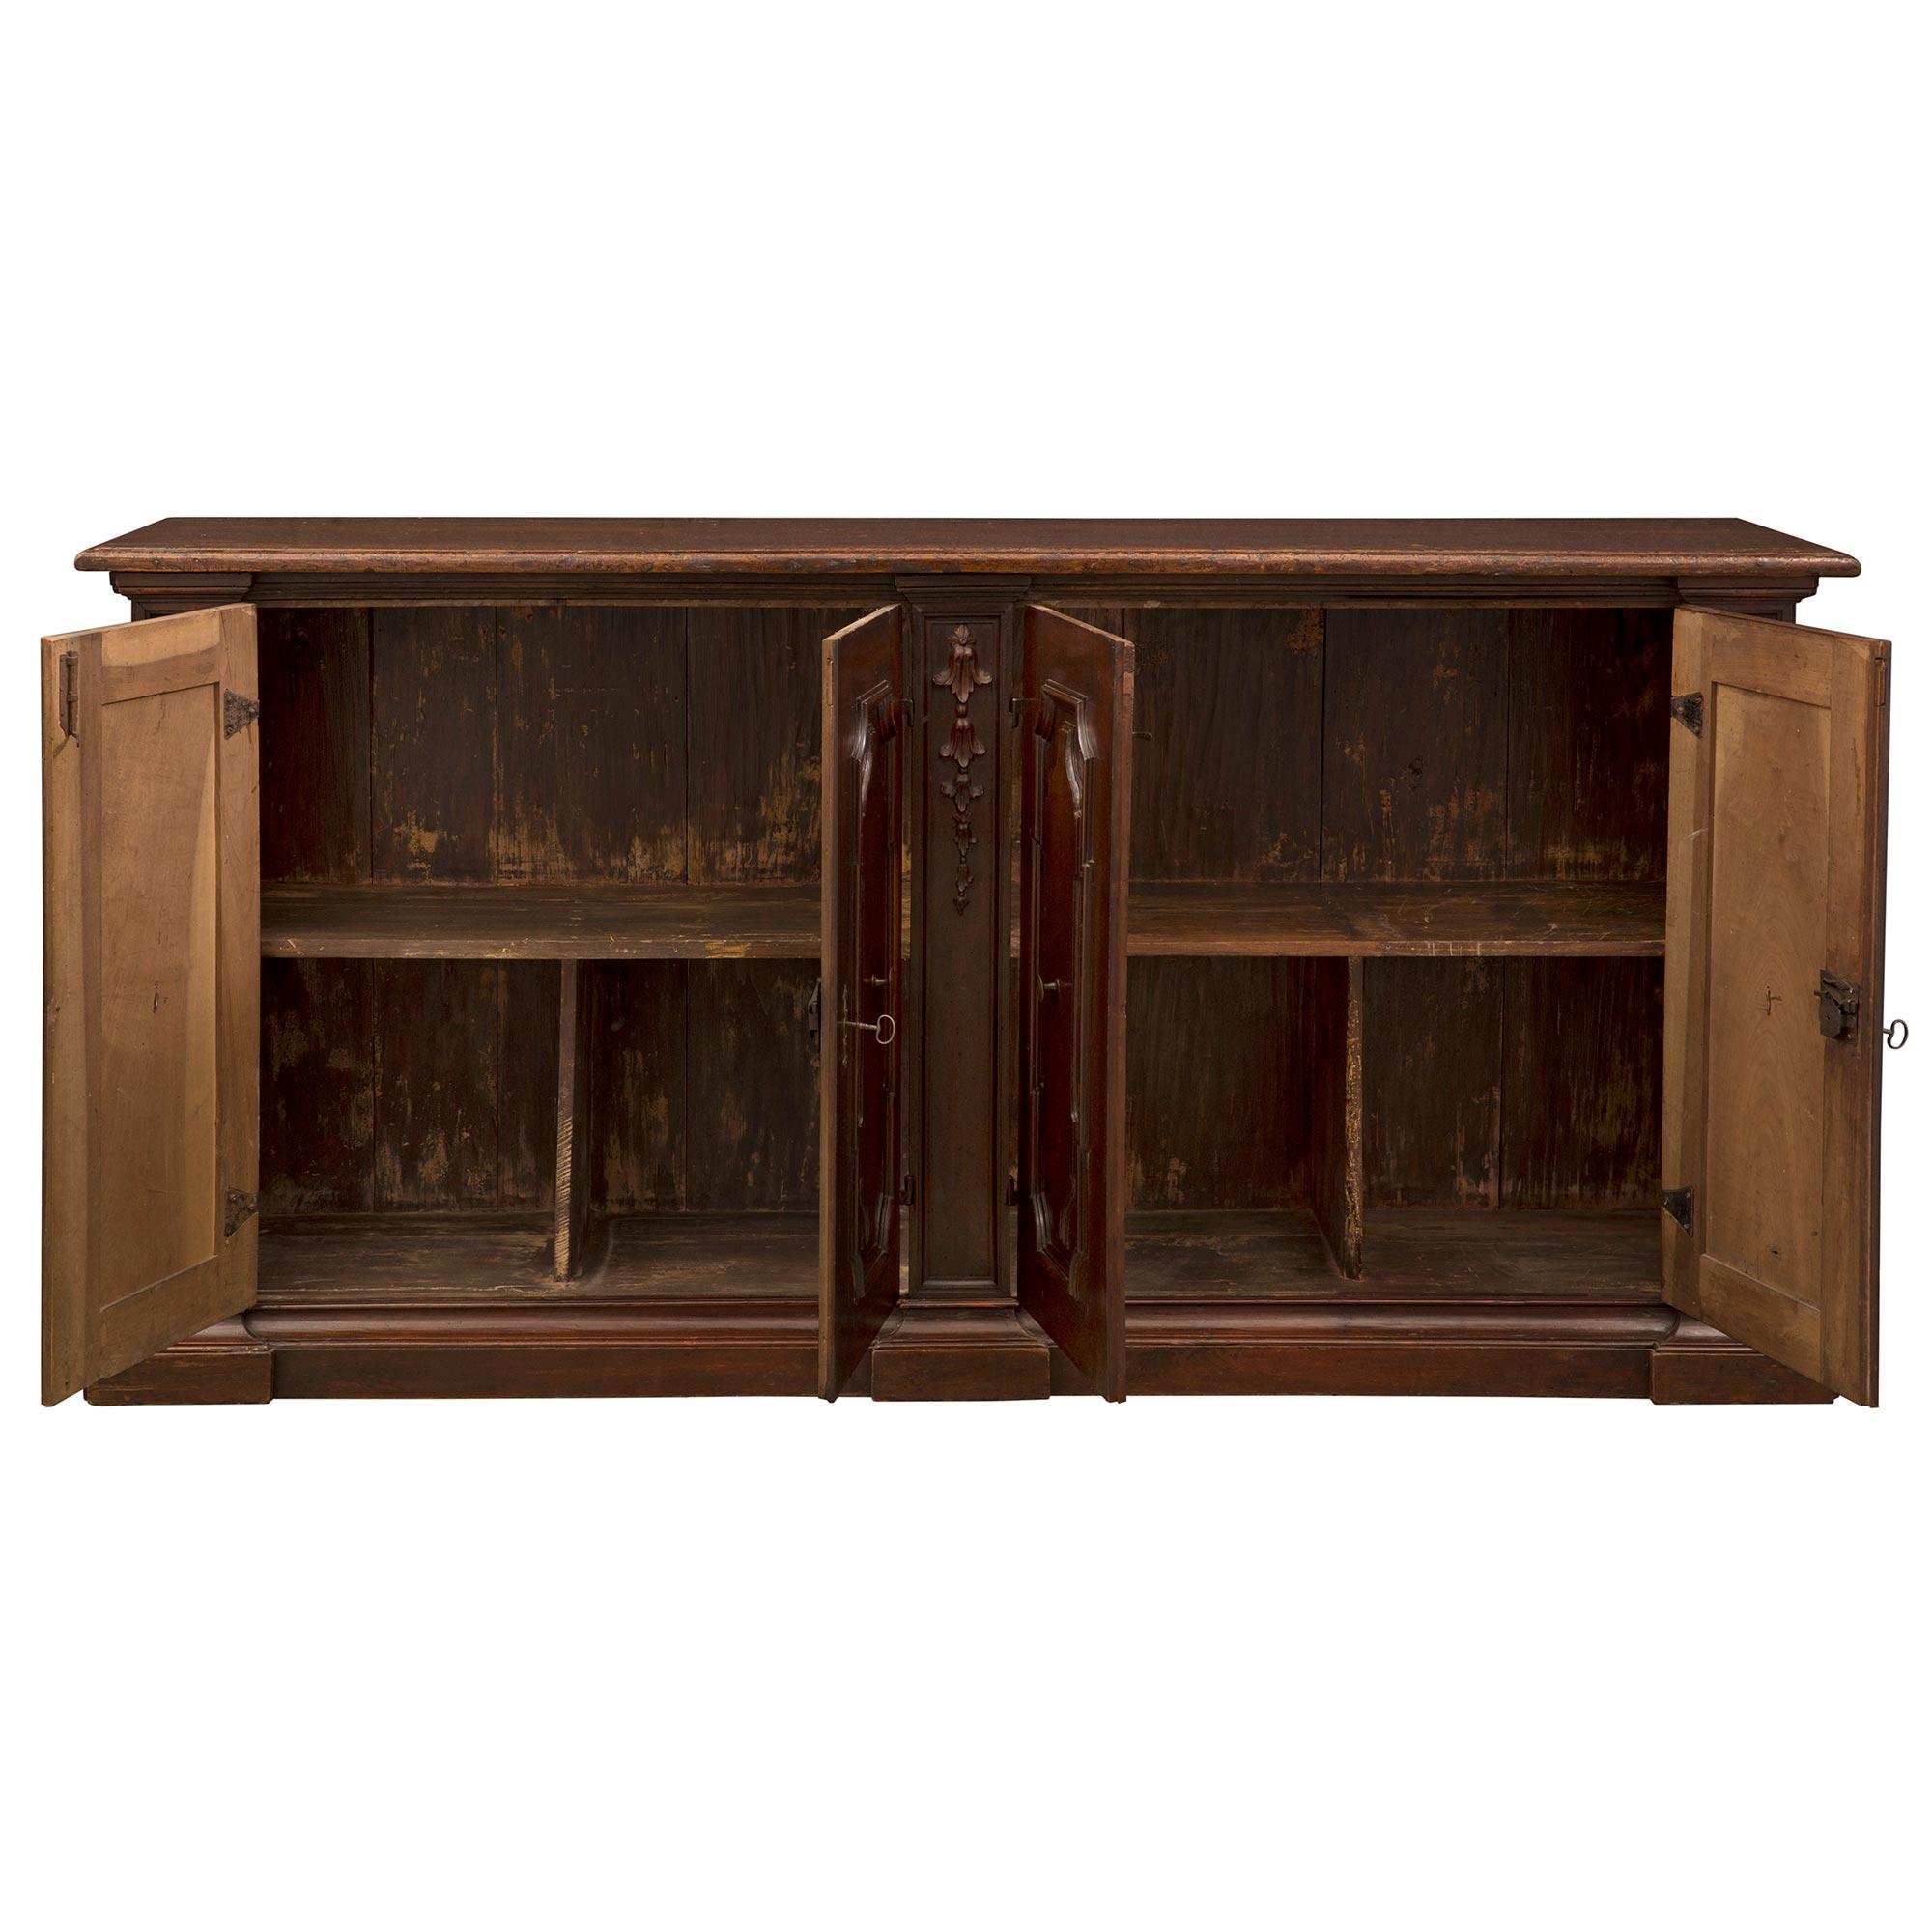 Italian 18th Century Walnut Credenza Buffet from Tuscany In Good Condition For Sale In West Palm Beach, FL